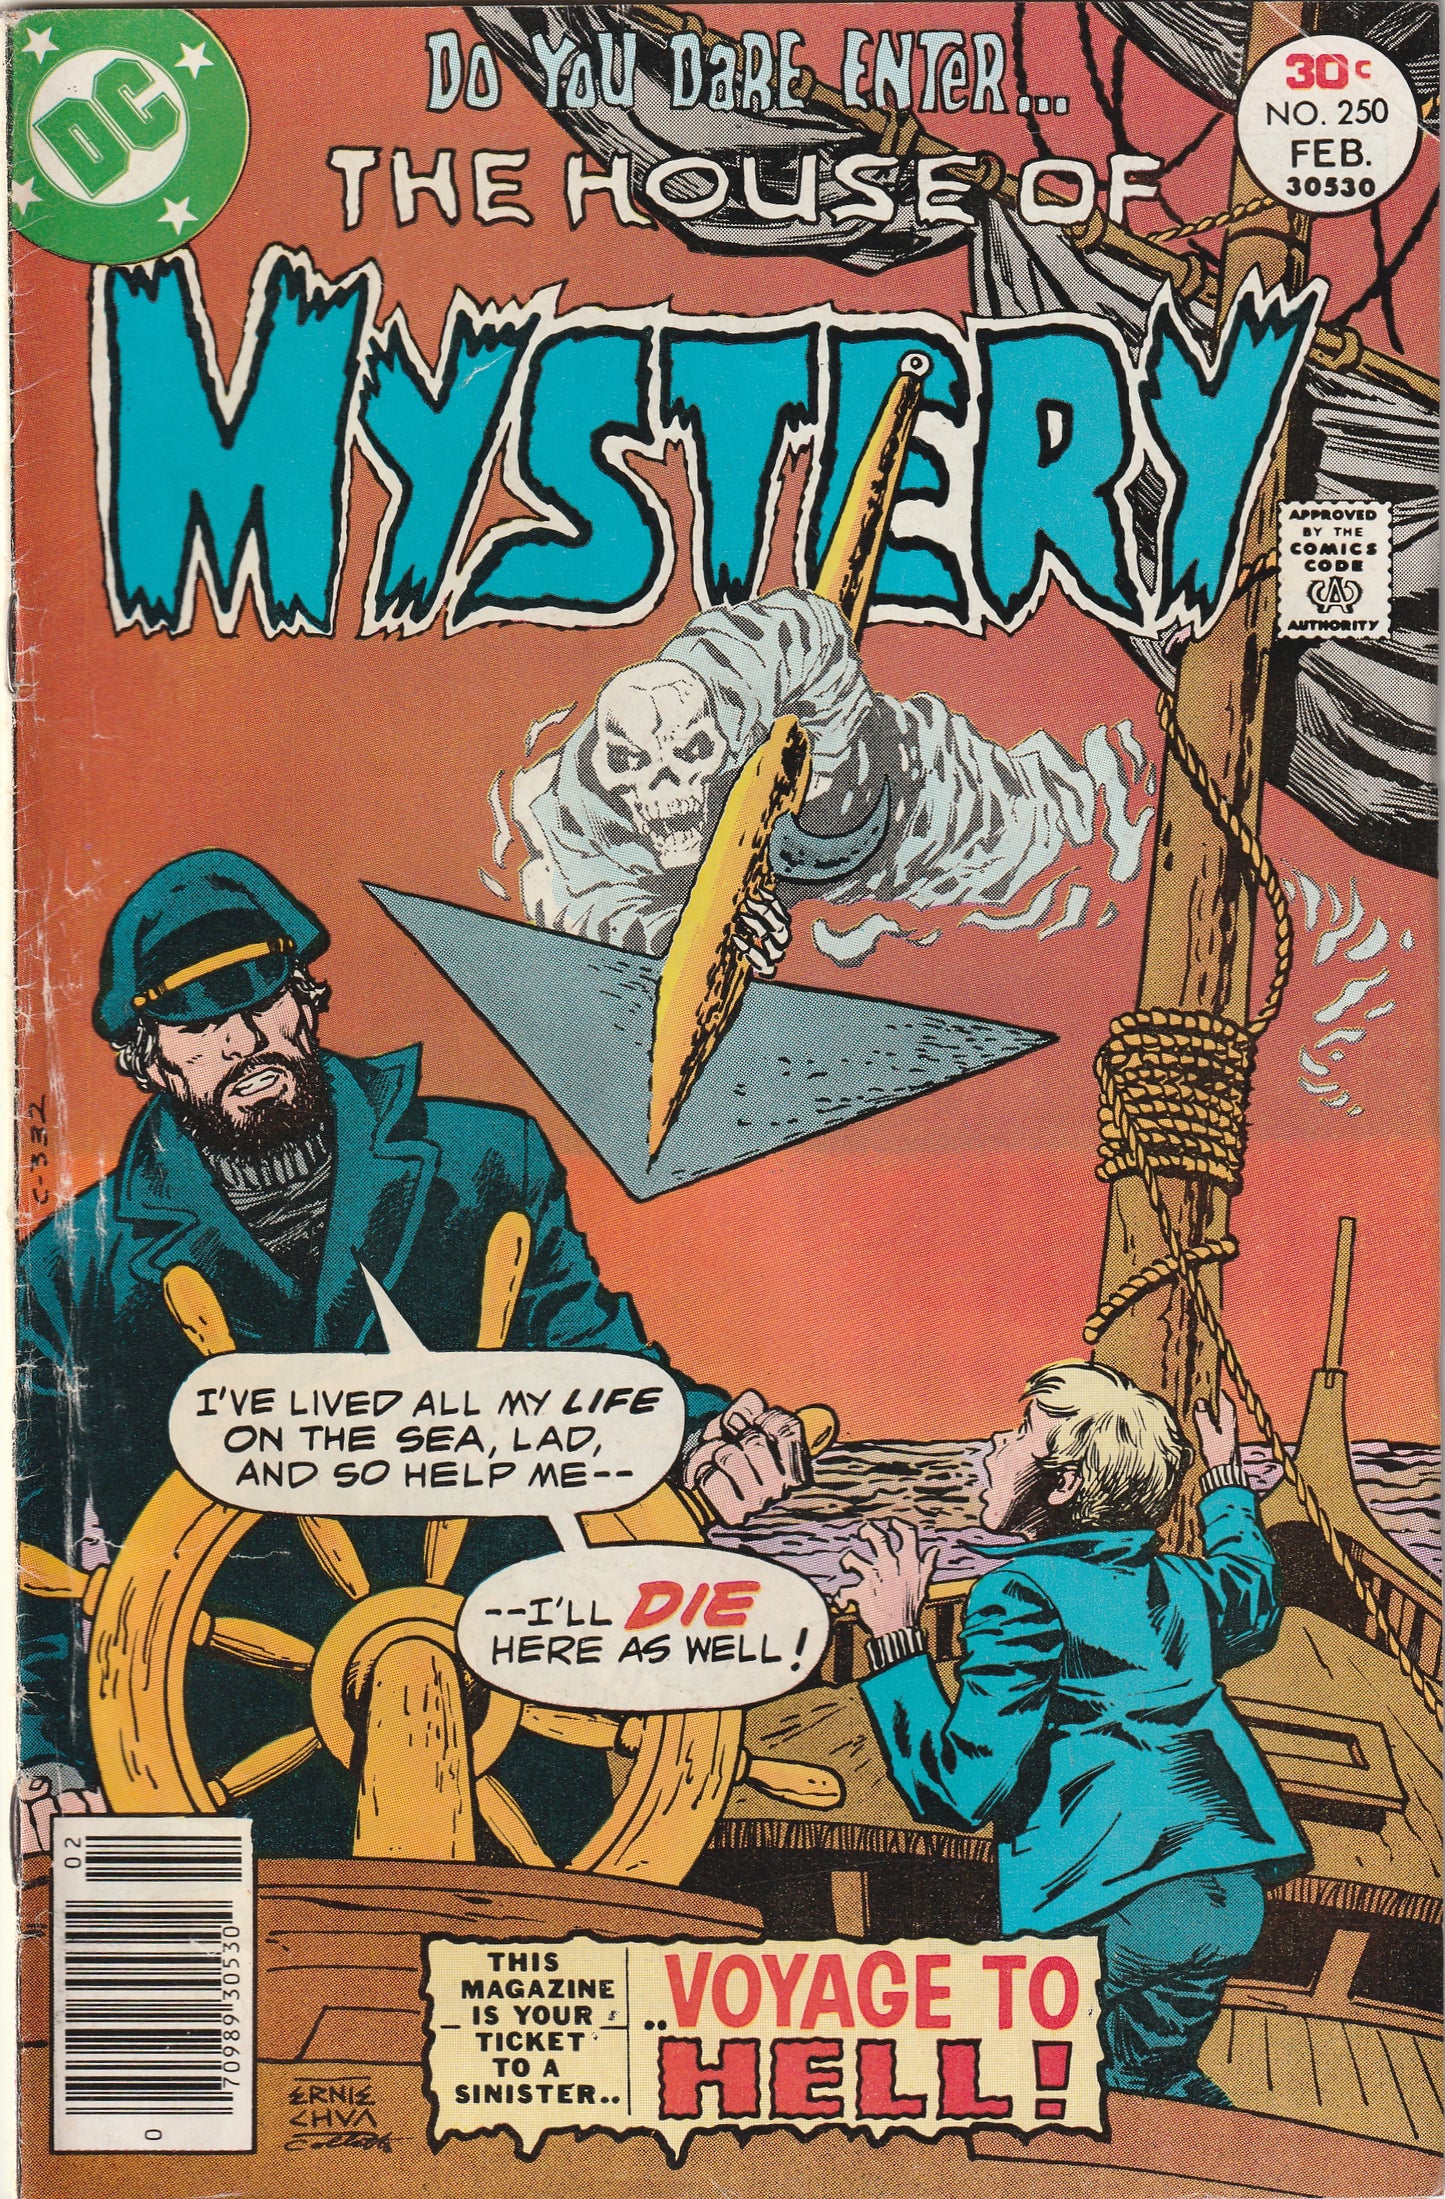 House of Mystery #250 (1977)